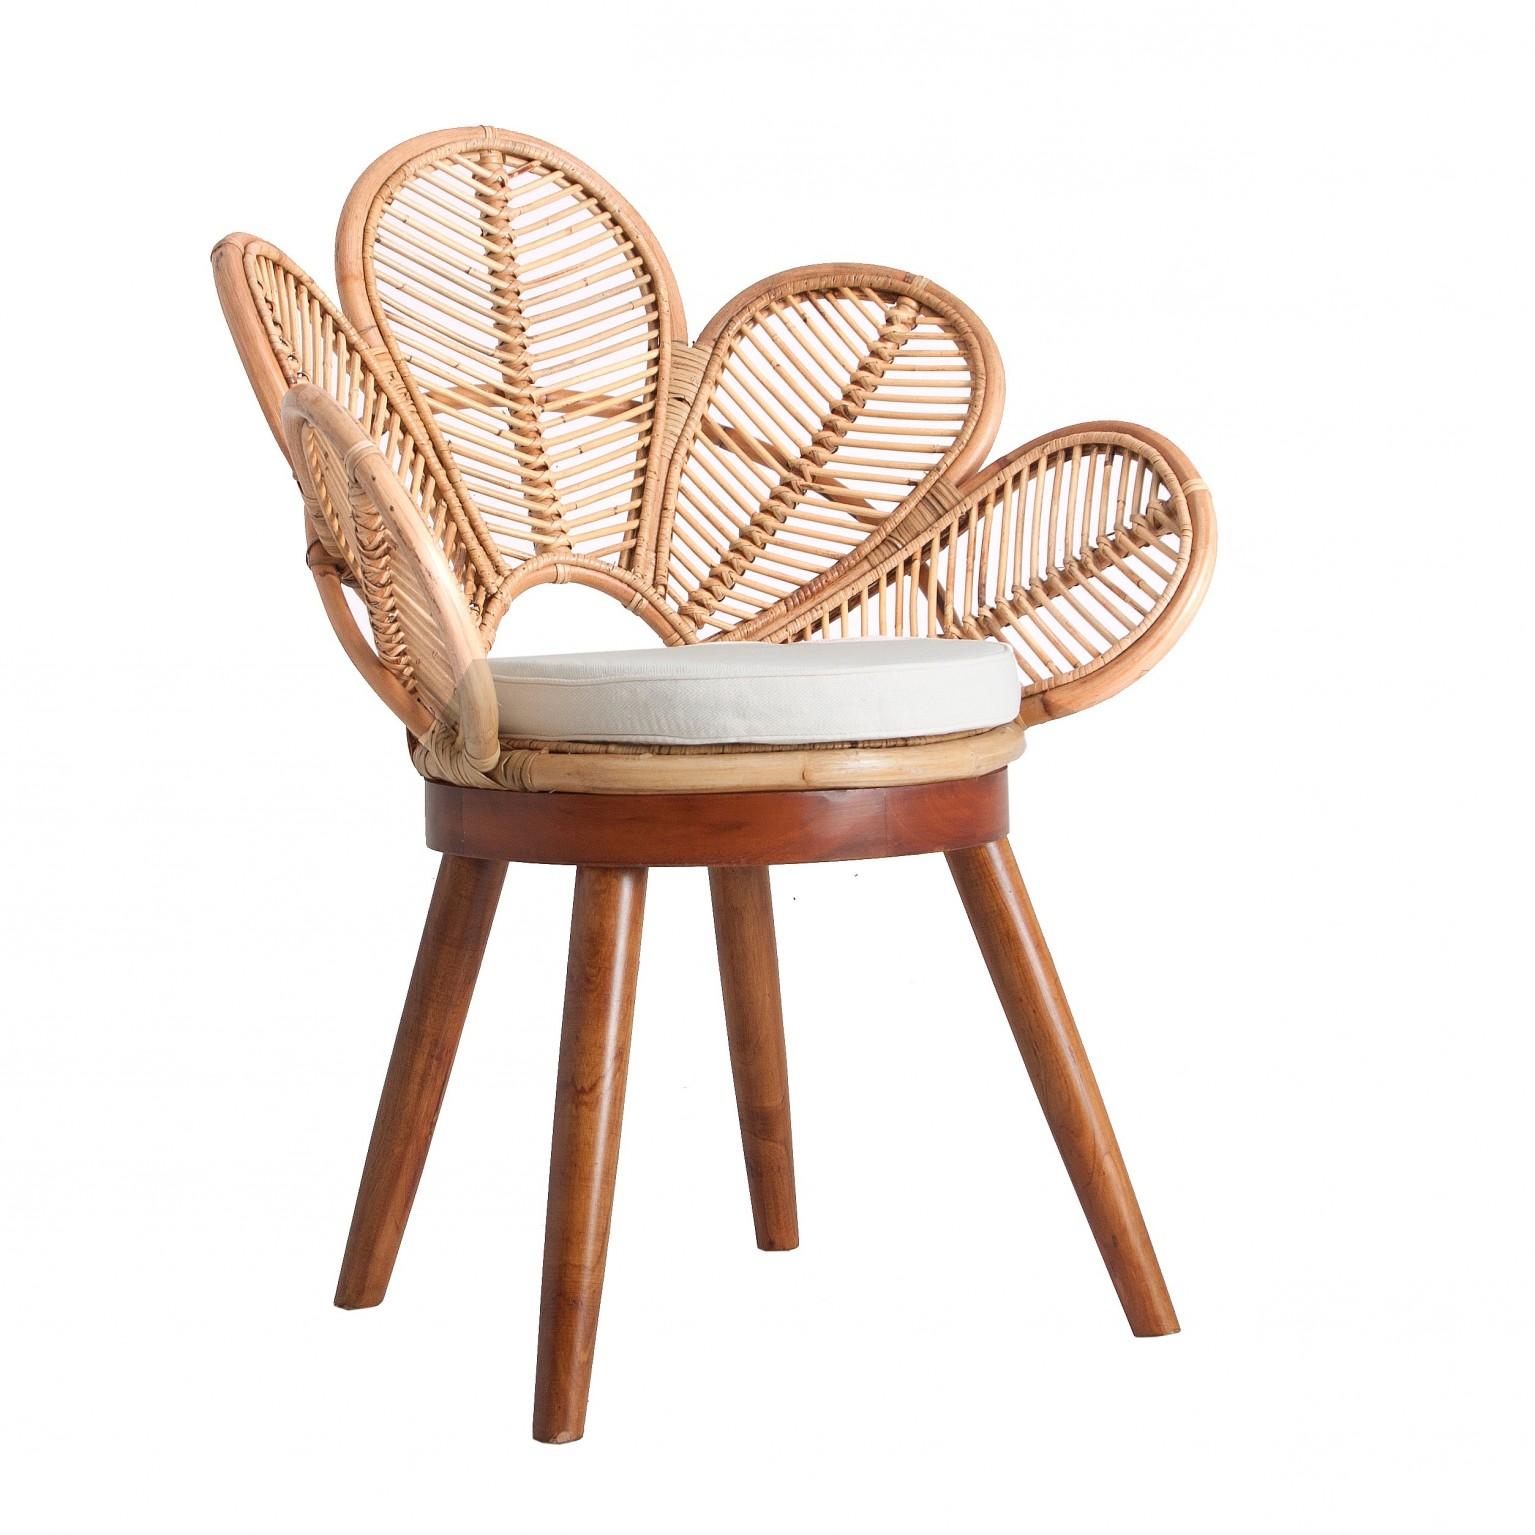 Gorgeous armchair: rattan flower petal shaped seat, on mahogany wooden feet. Perfect on your terrace, in your veranda, around the swimming pool or the dining table. Poetic, elegant, aerial.